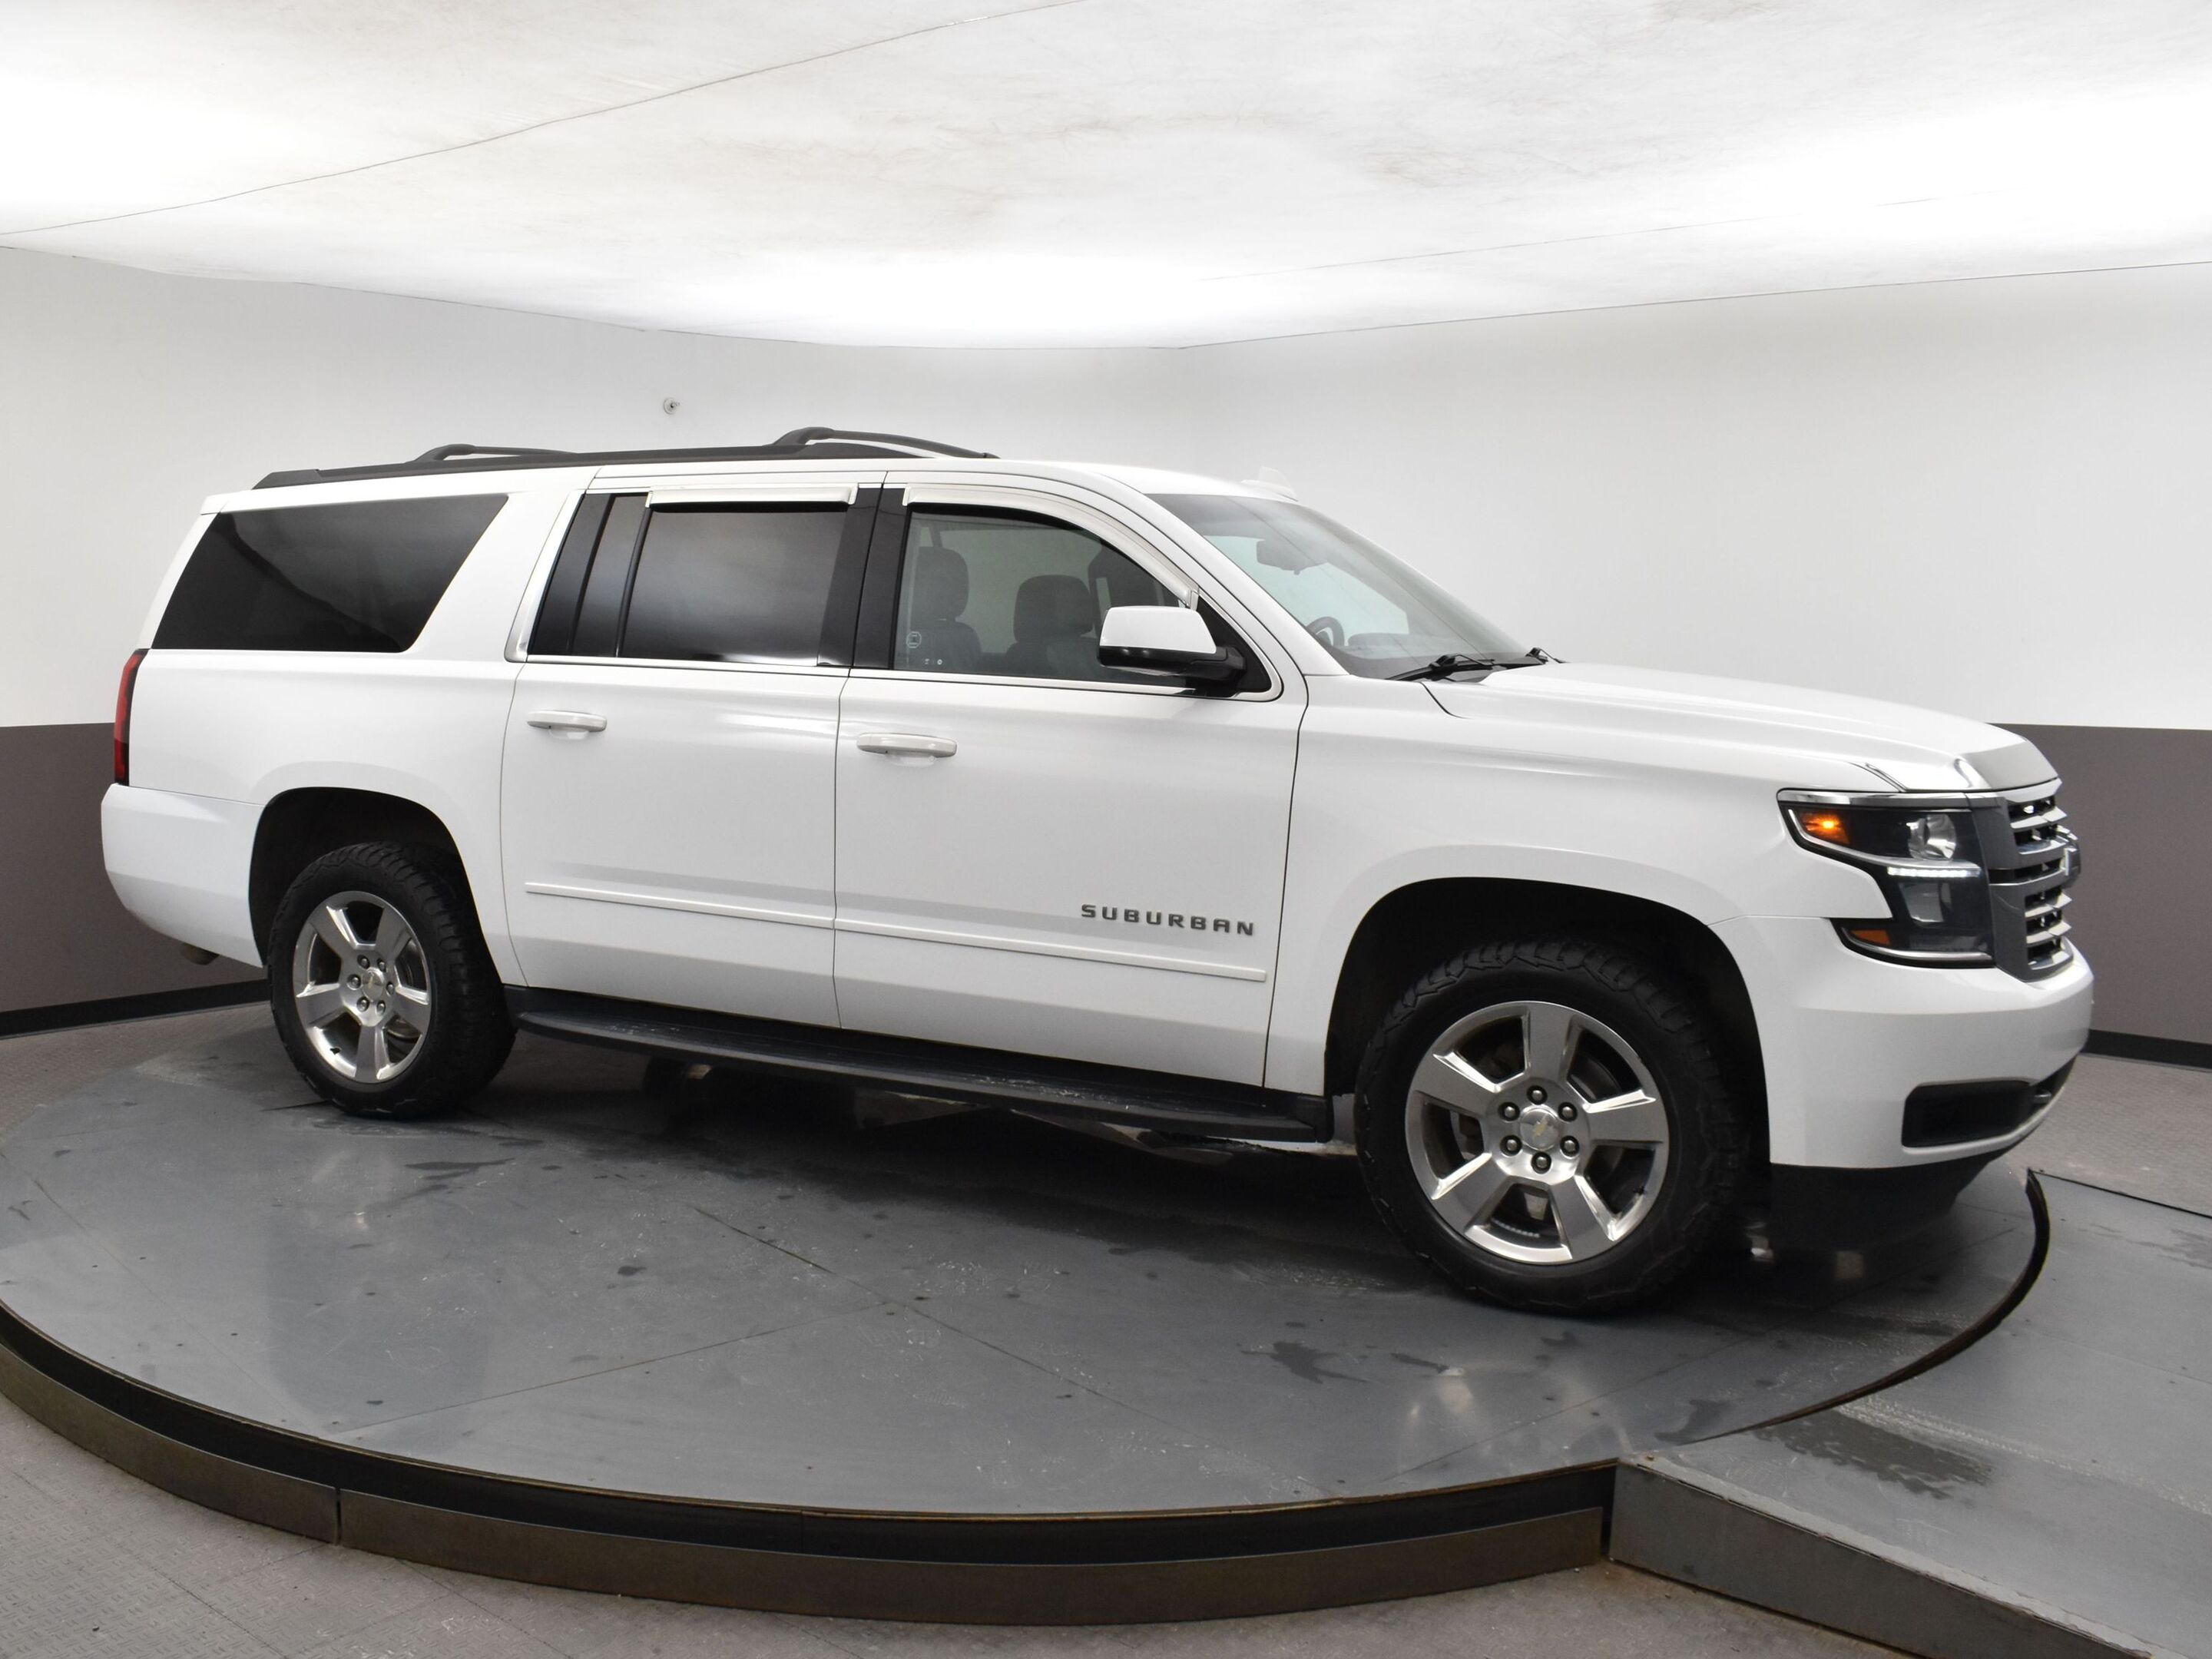 2019 Chevrolet Suburban LS 4x4 Leather 8 Passenger, Leather, Heated/power 